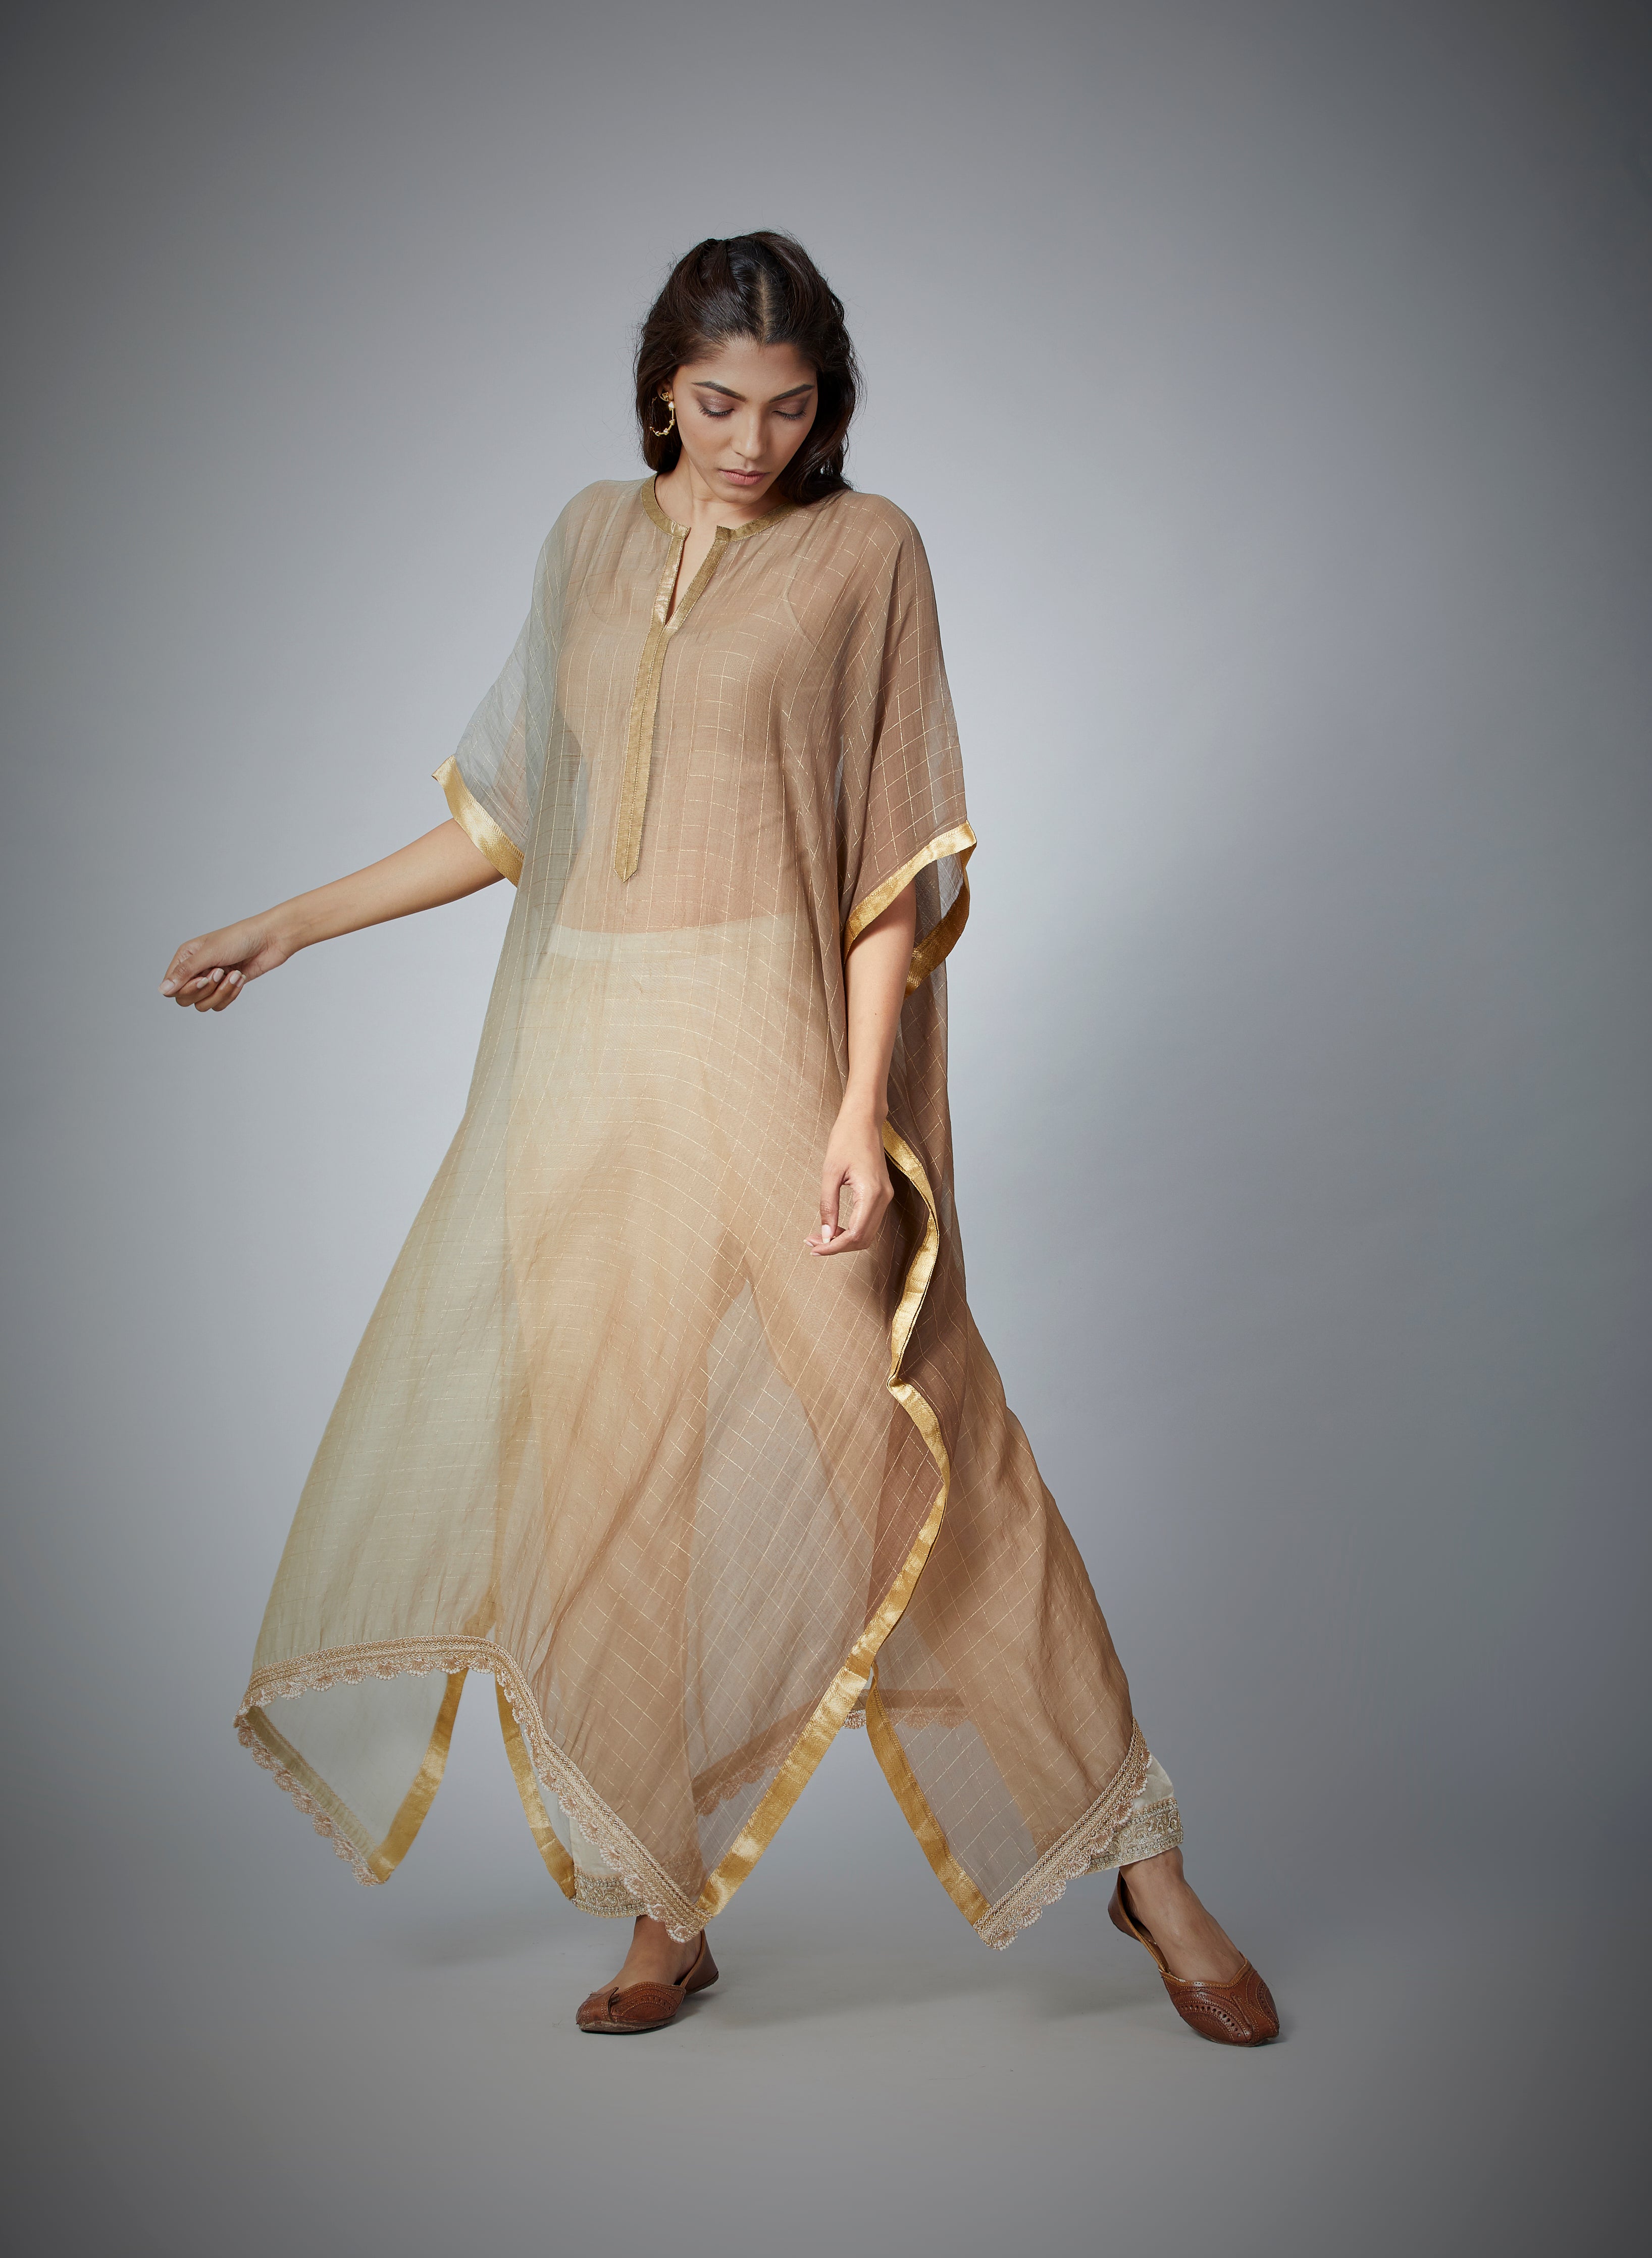 Limited Edition : Dark Ivory Ombre Handwoven Kaftan.